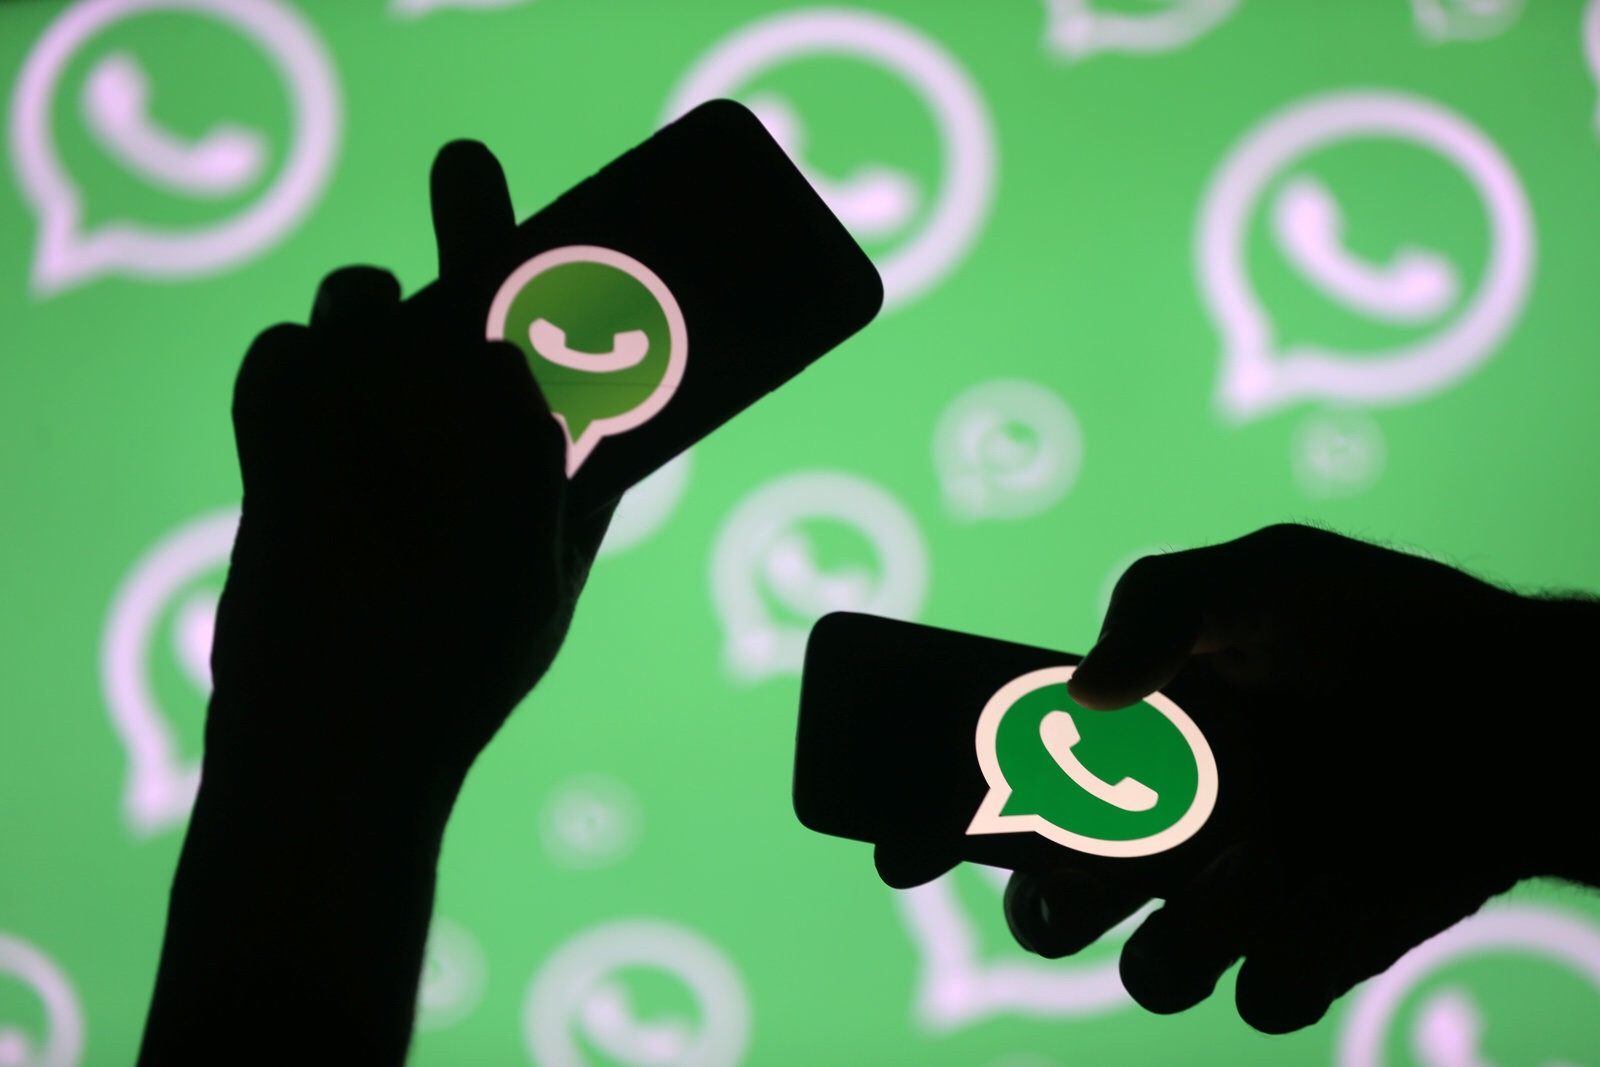 You now have an hour to unsend messages on WhatsApp